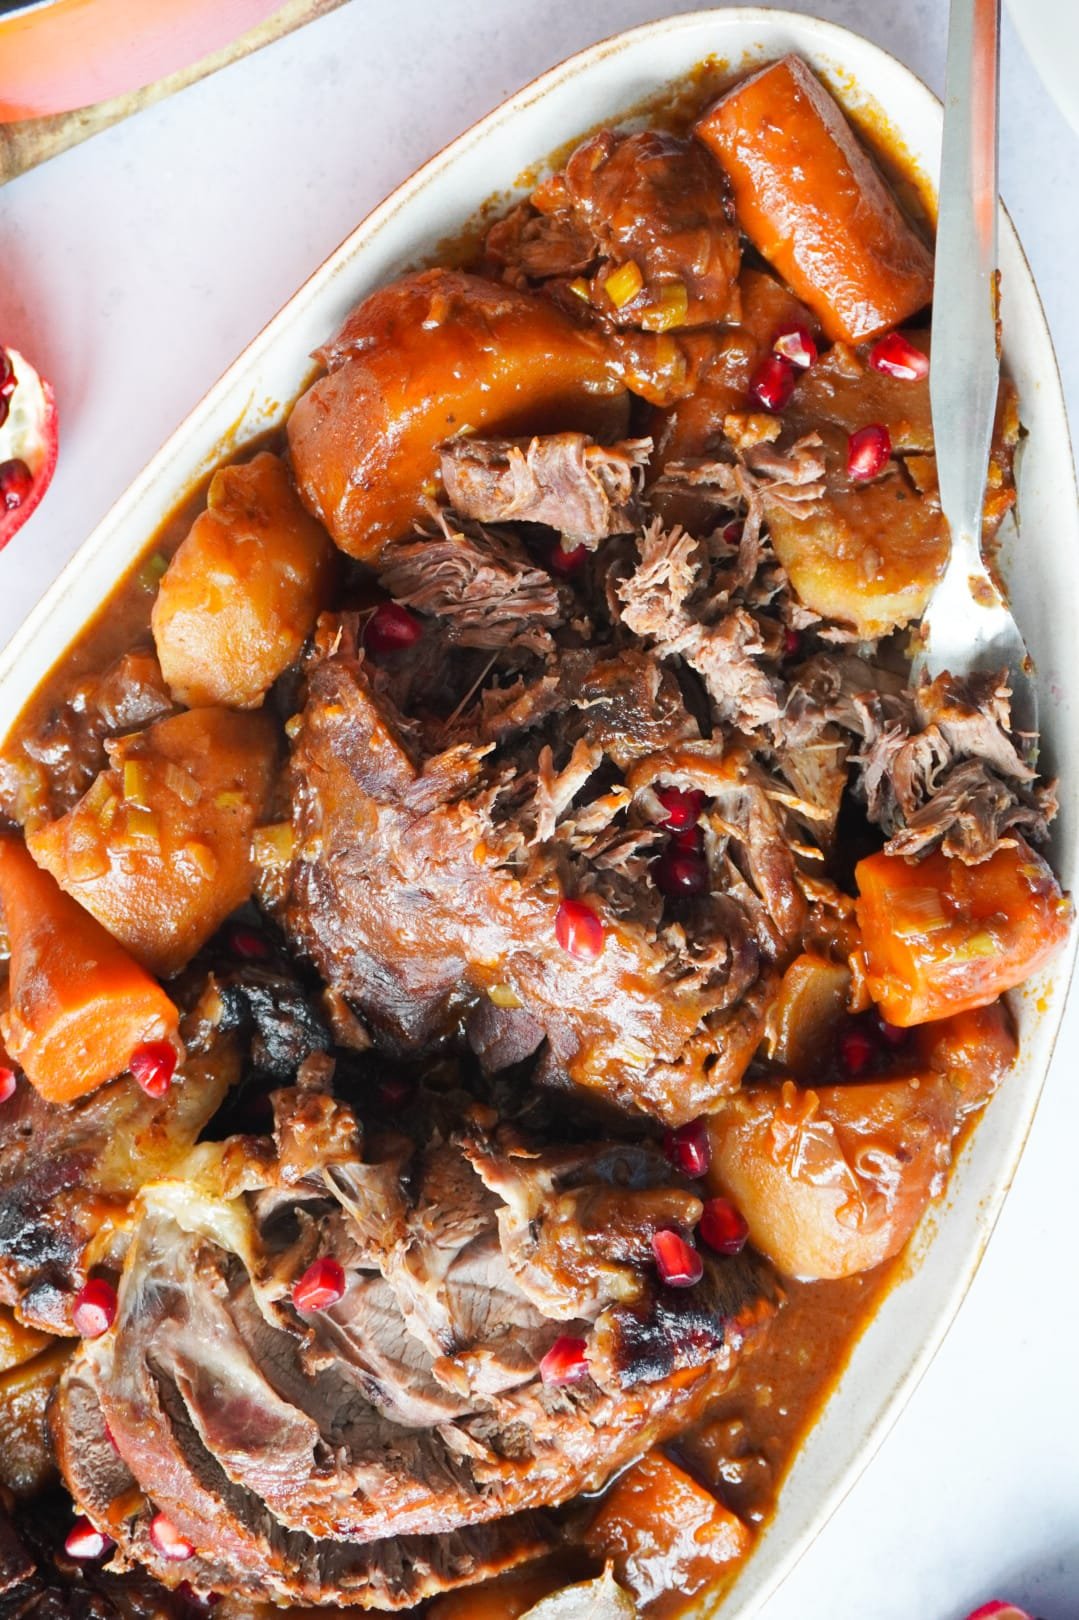 Beef Shanks recipe made in a the oven with pomegranate seeds sprinkled on top